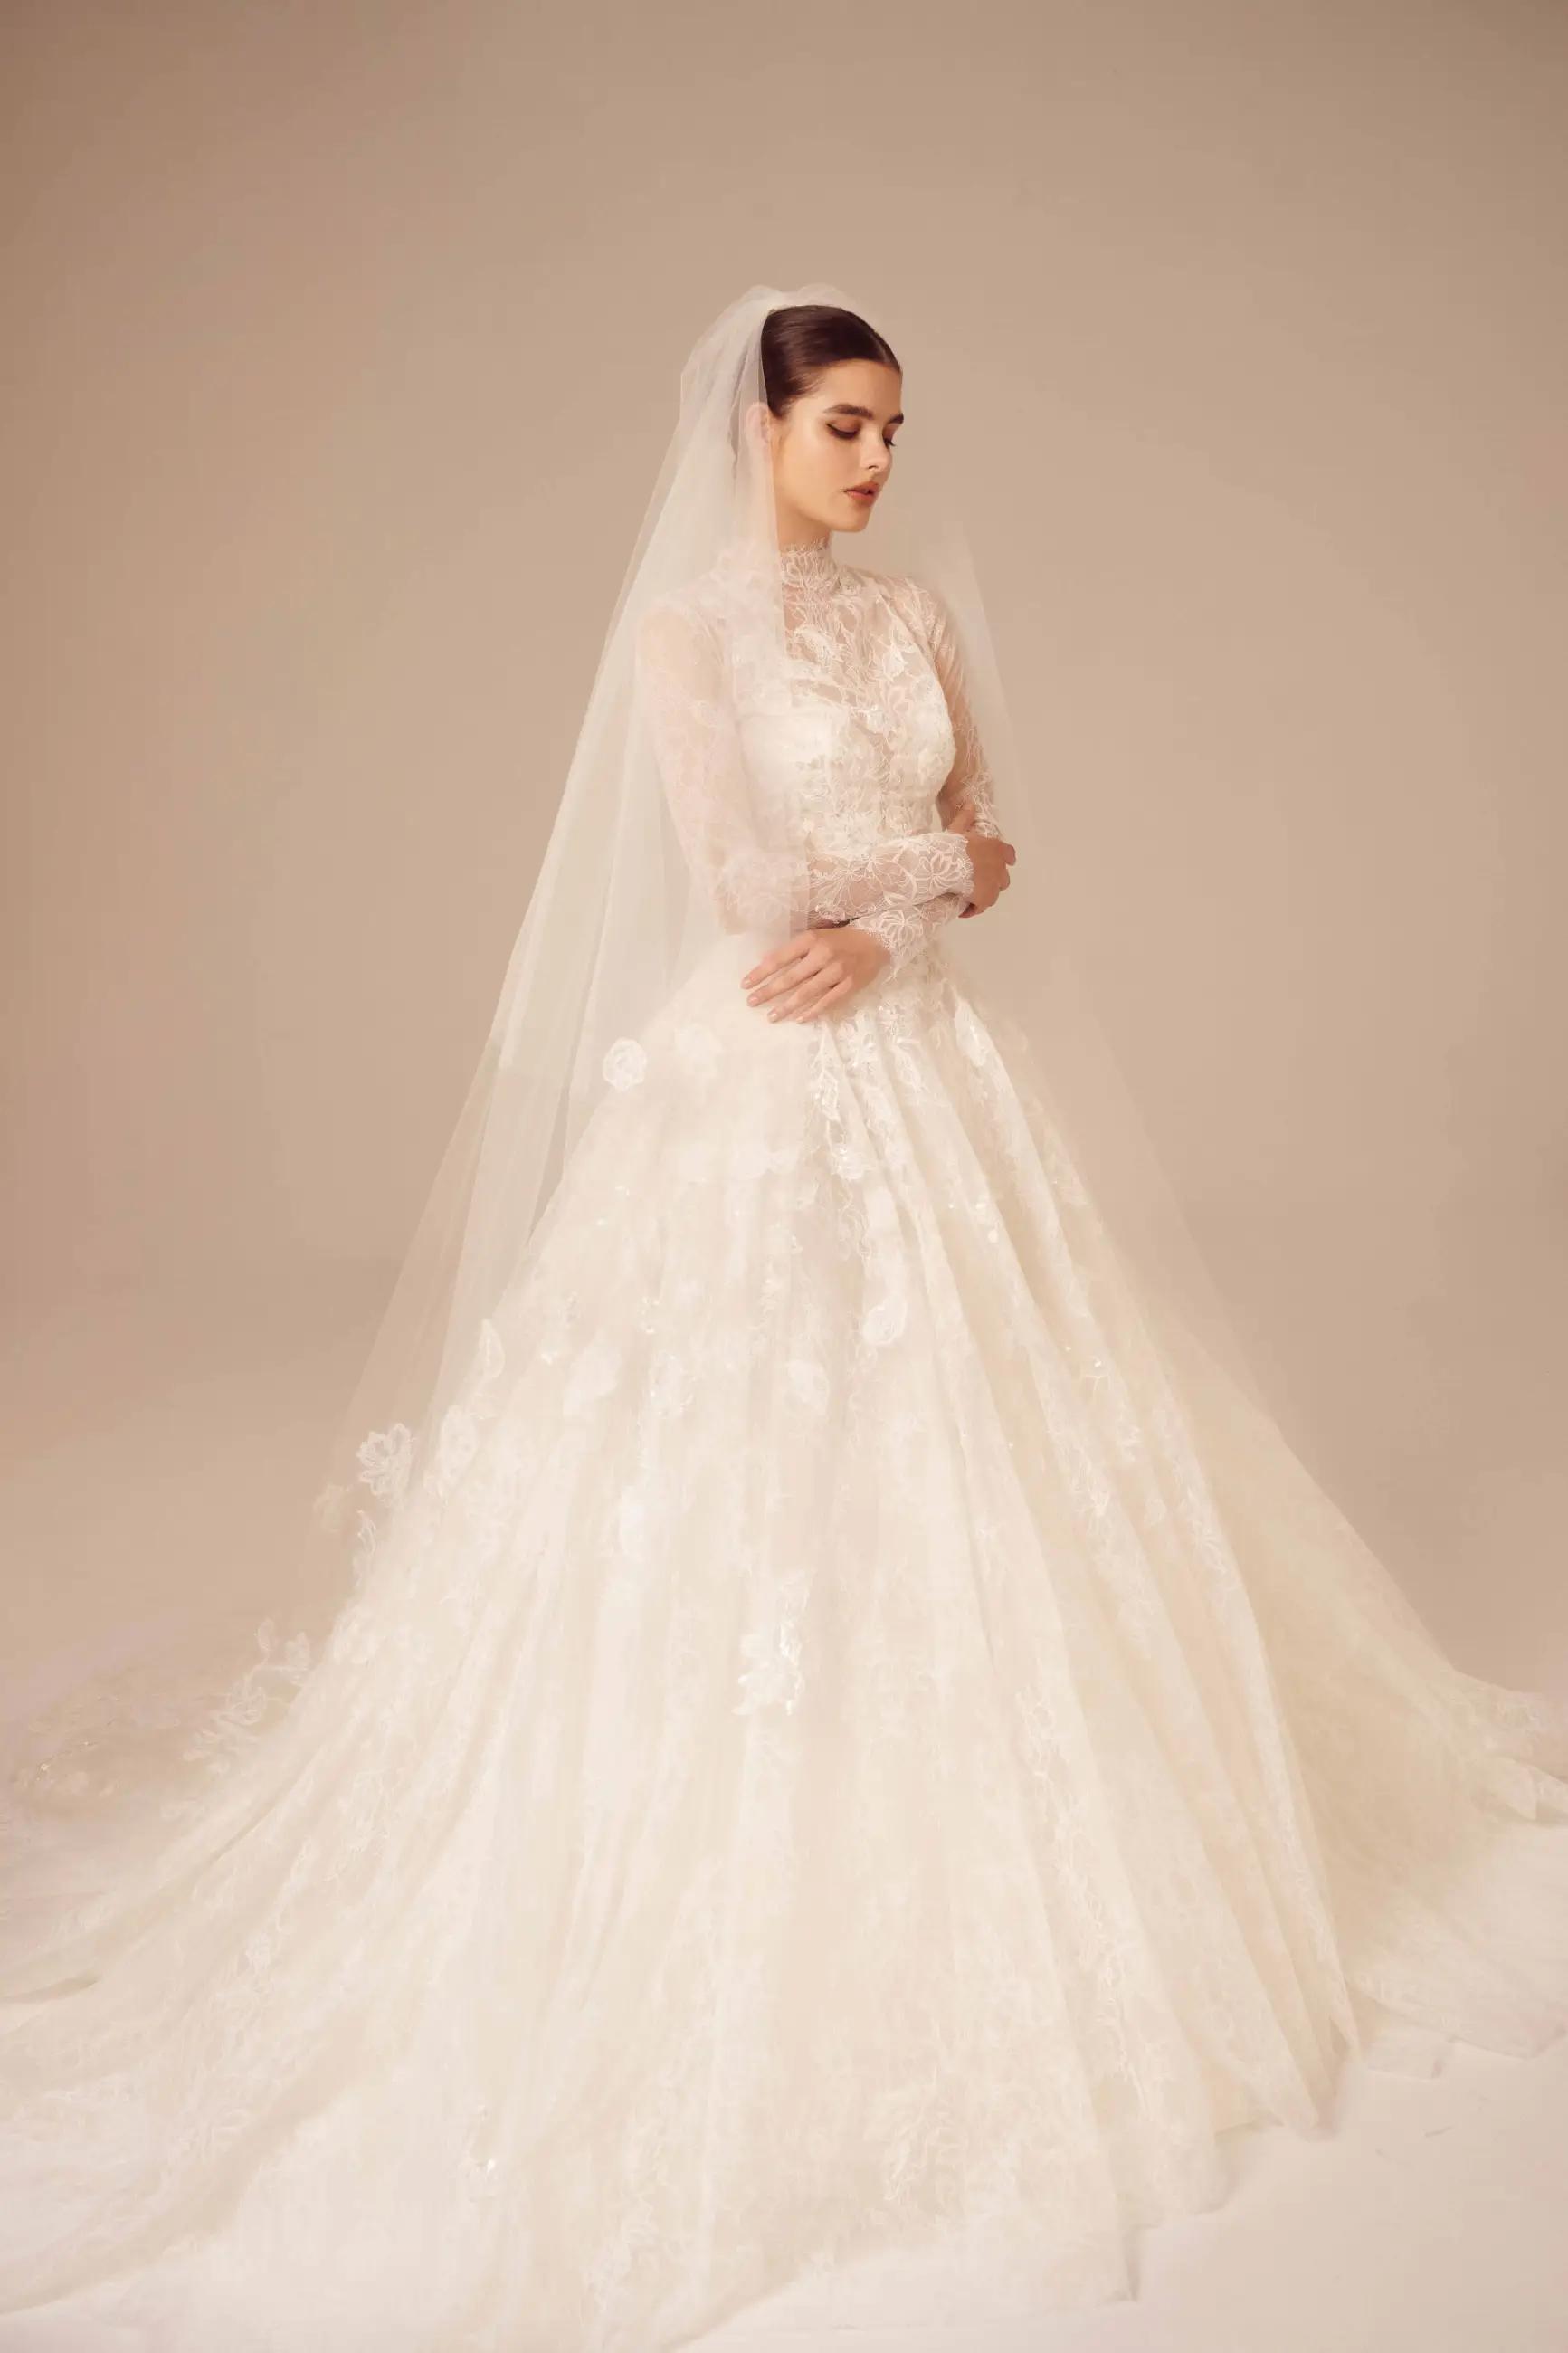 Radiating Love and Light in Nicole And Felicia Bridal Gowns. Mobile Image